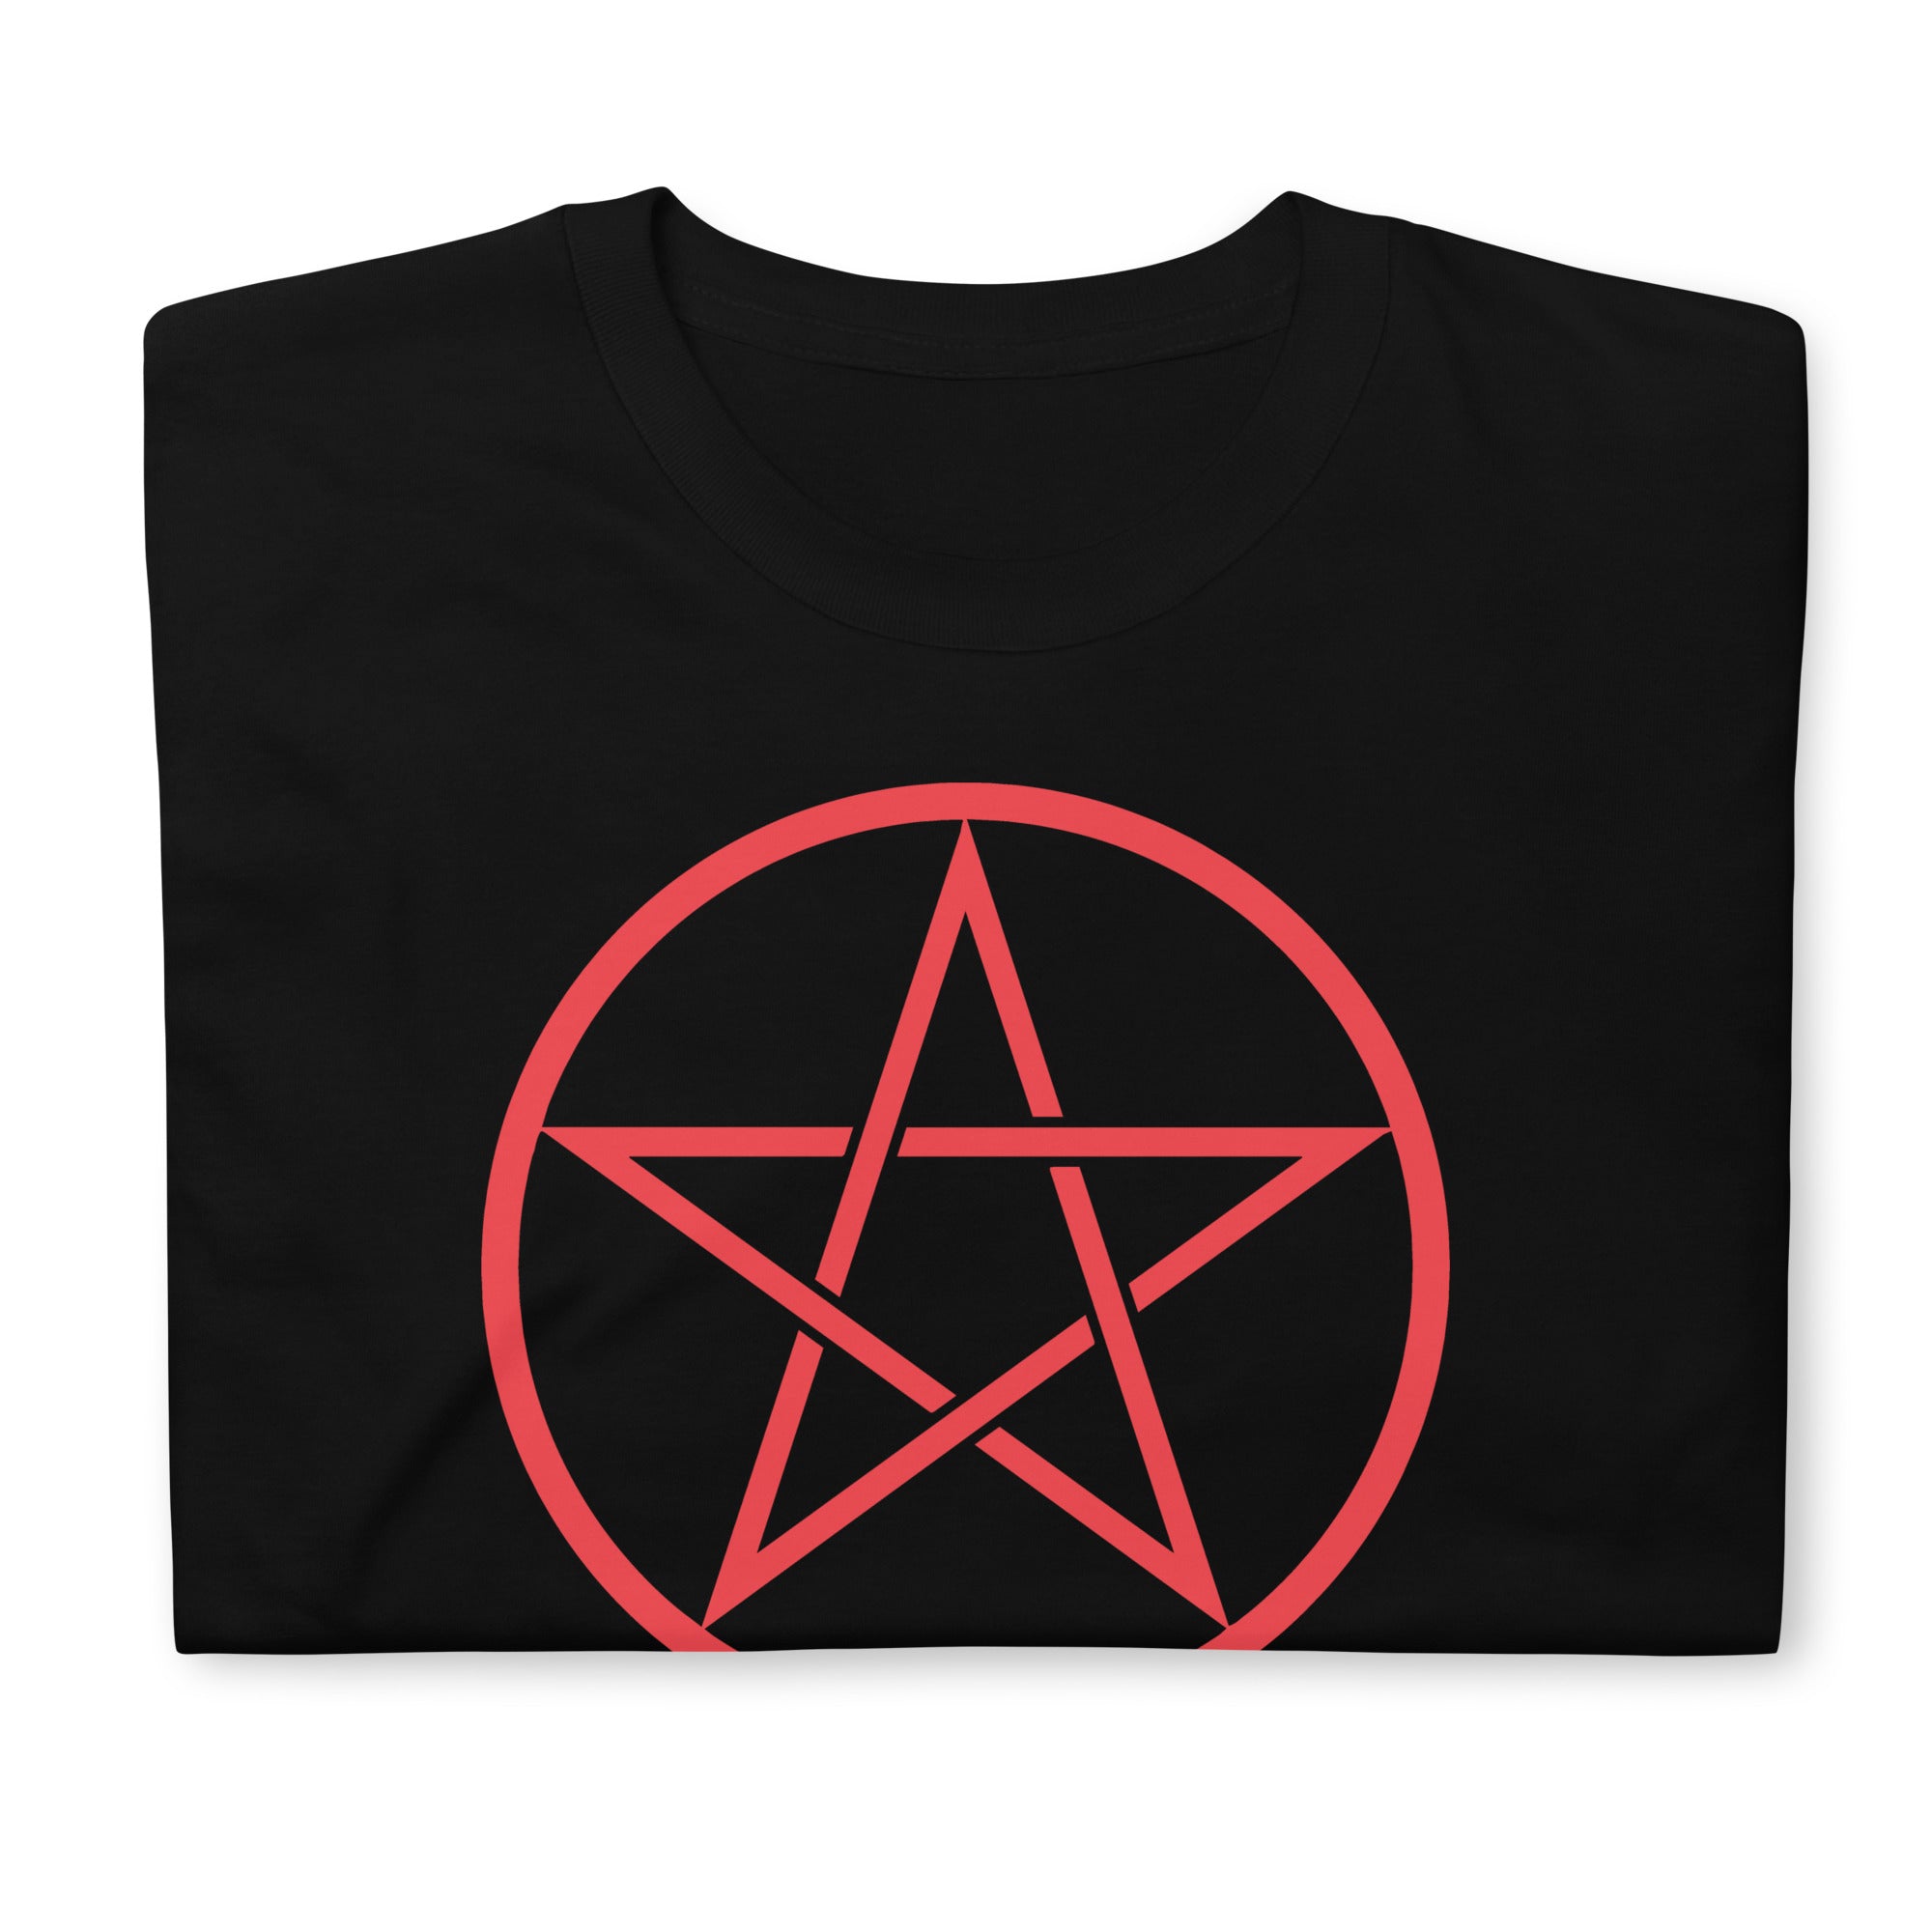 Red Goth Wiccan Woven Pentagram Men's Short-Sleeve T-Shirt - Edge of Life Designs